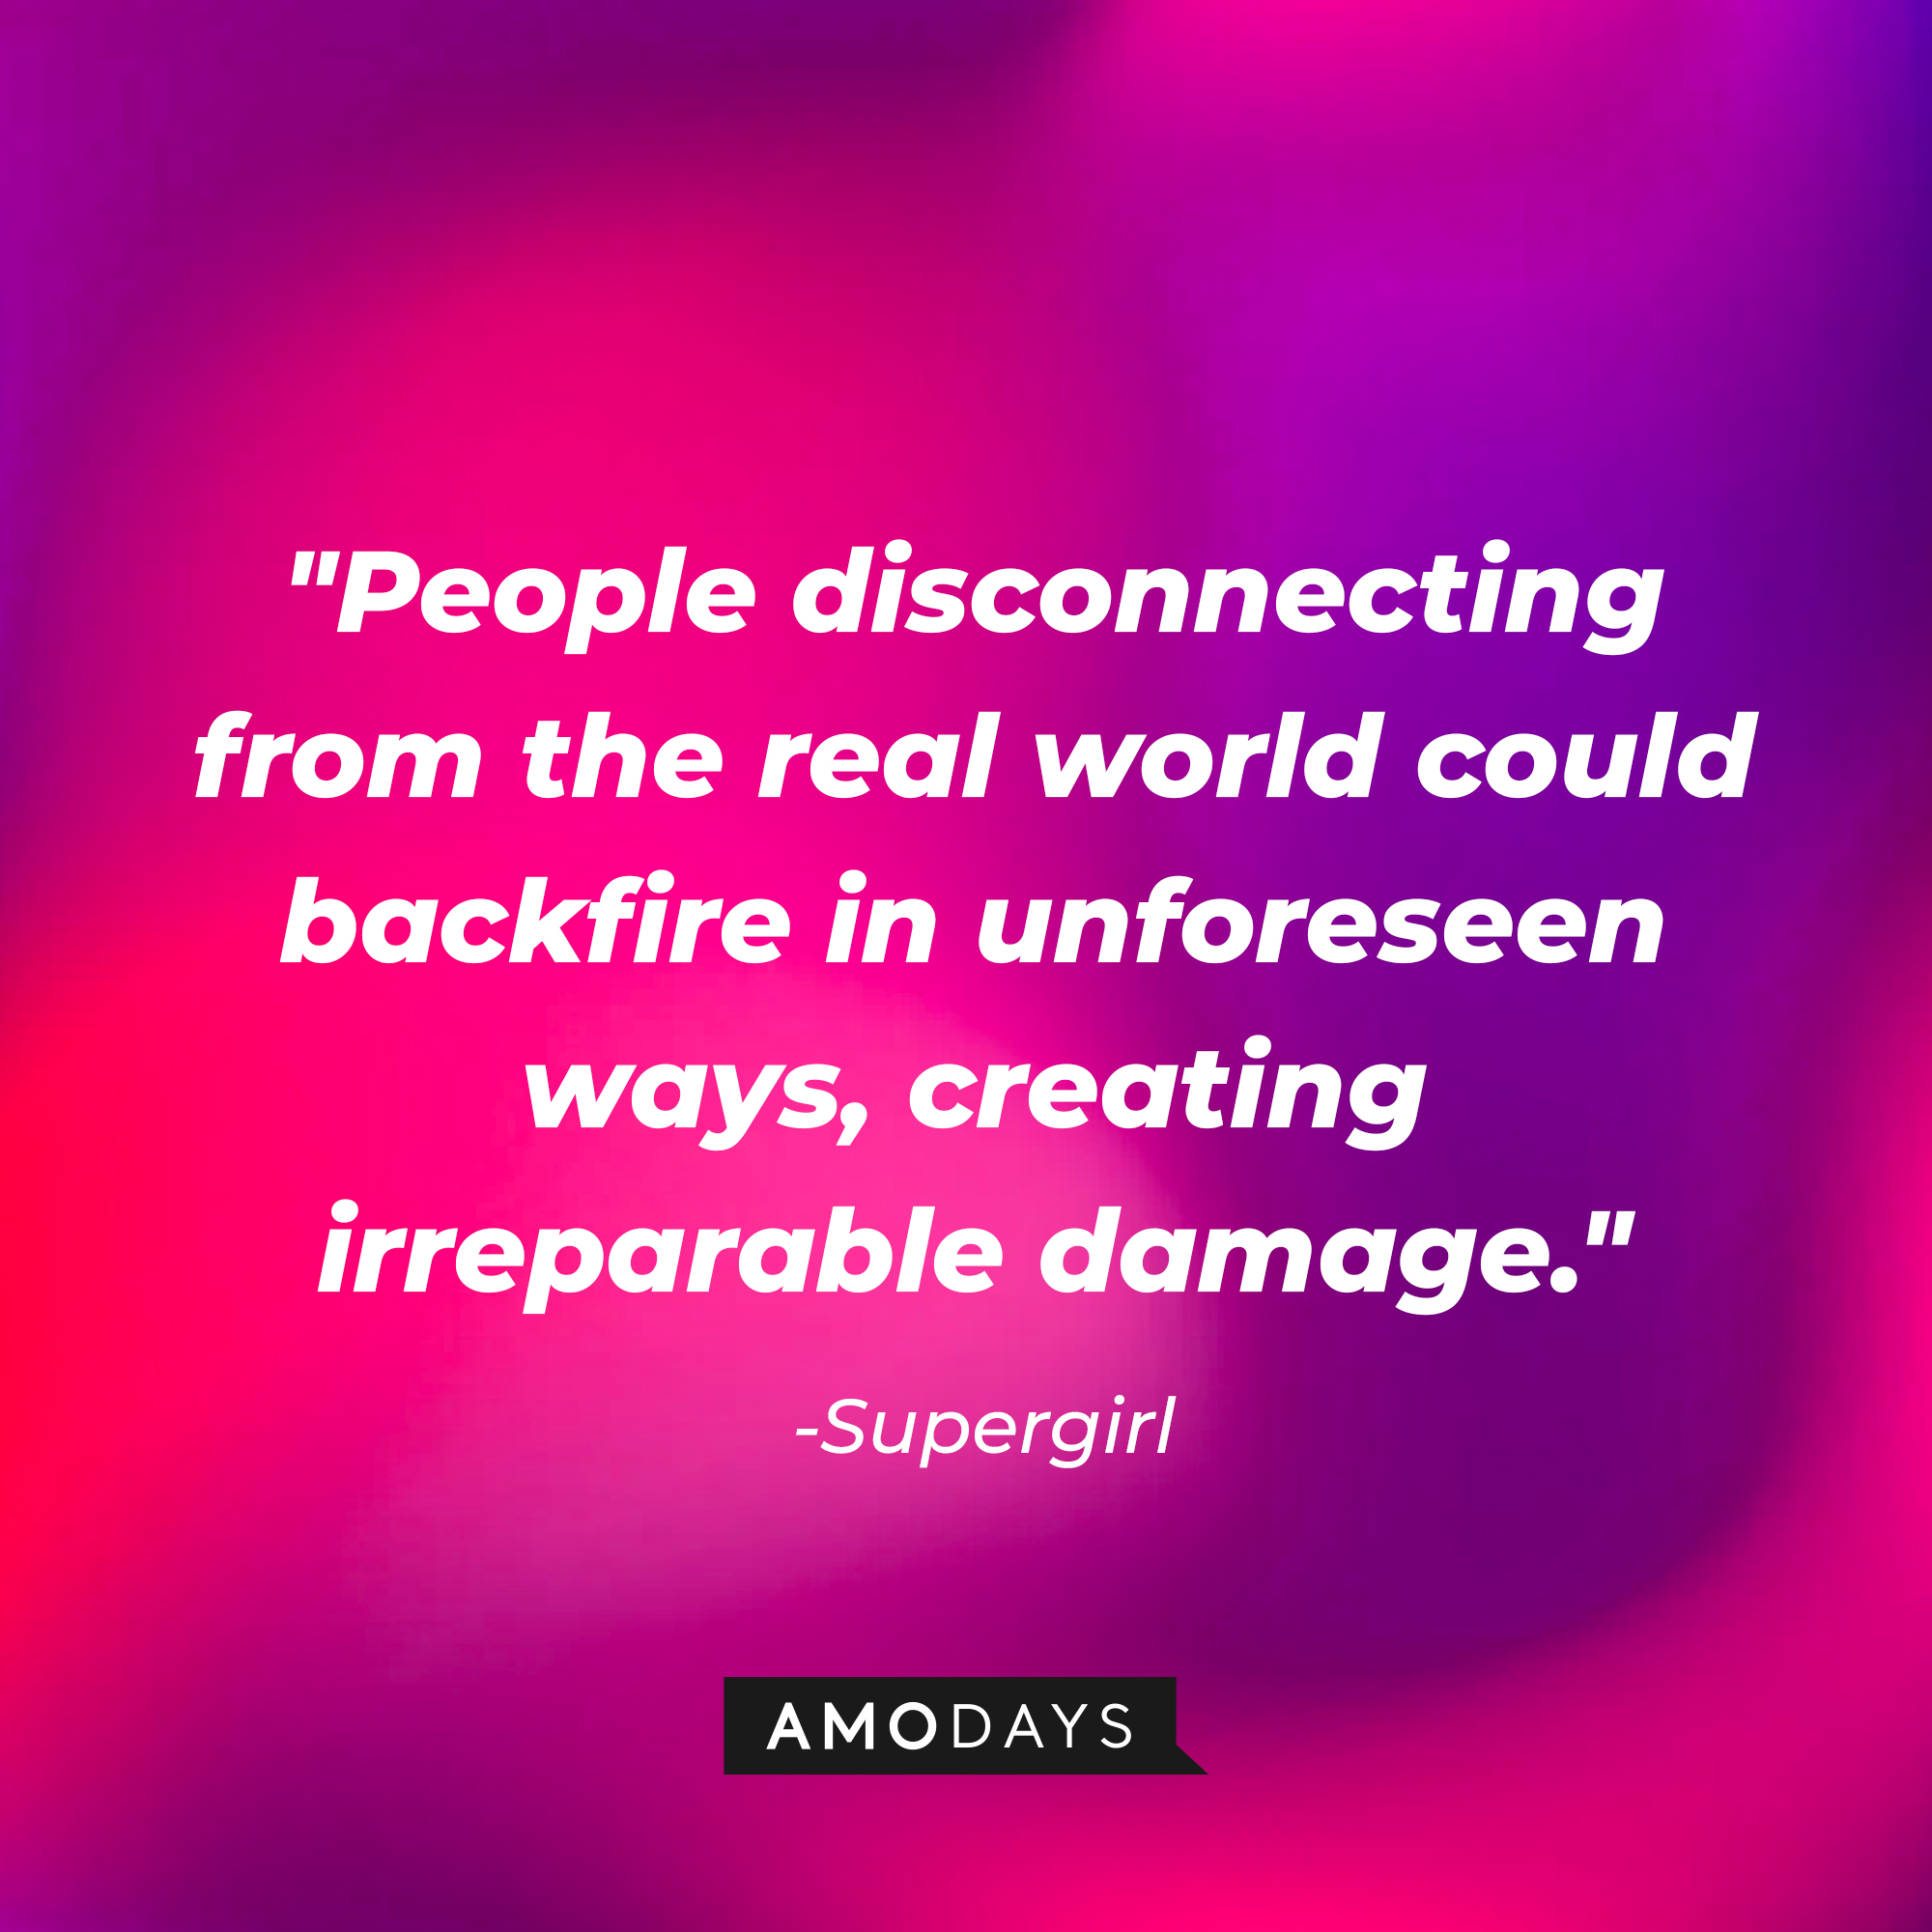 Supergirl's quote: "People disconnecting from the real world could backfire in unforeseen ways, creating irreparable damage." | Source: AmoDays